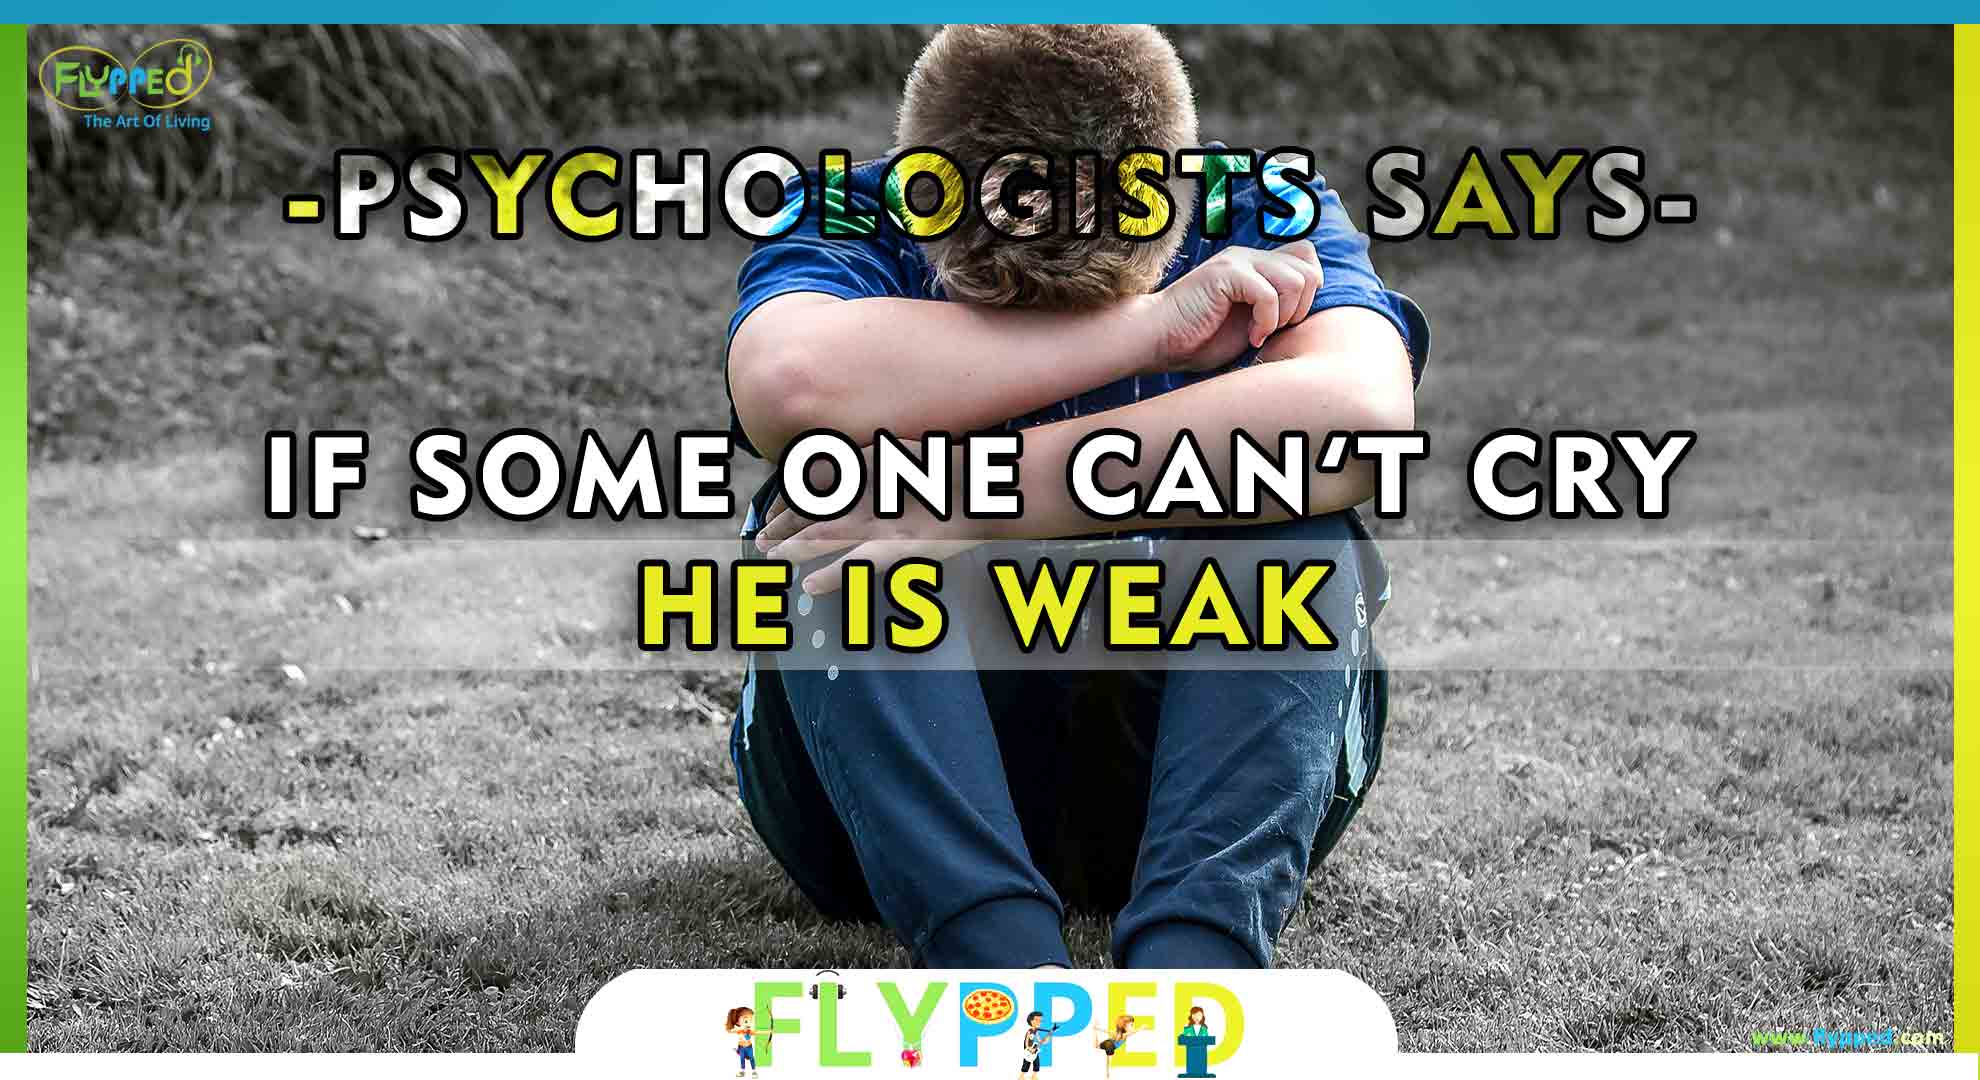 Psychologists-says-about-person2